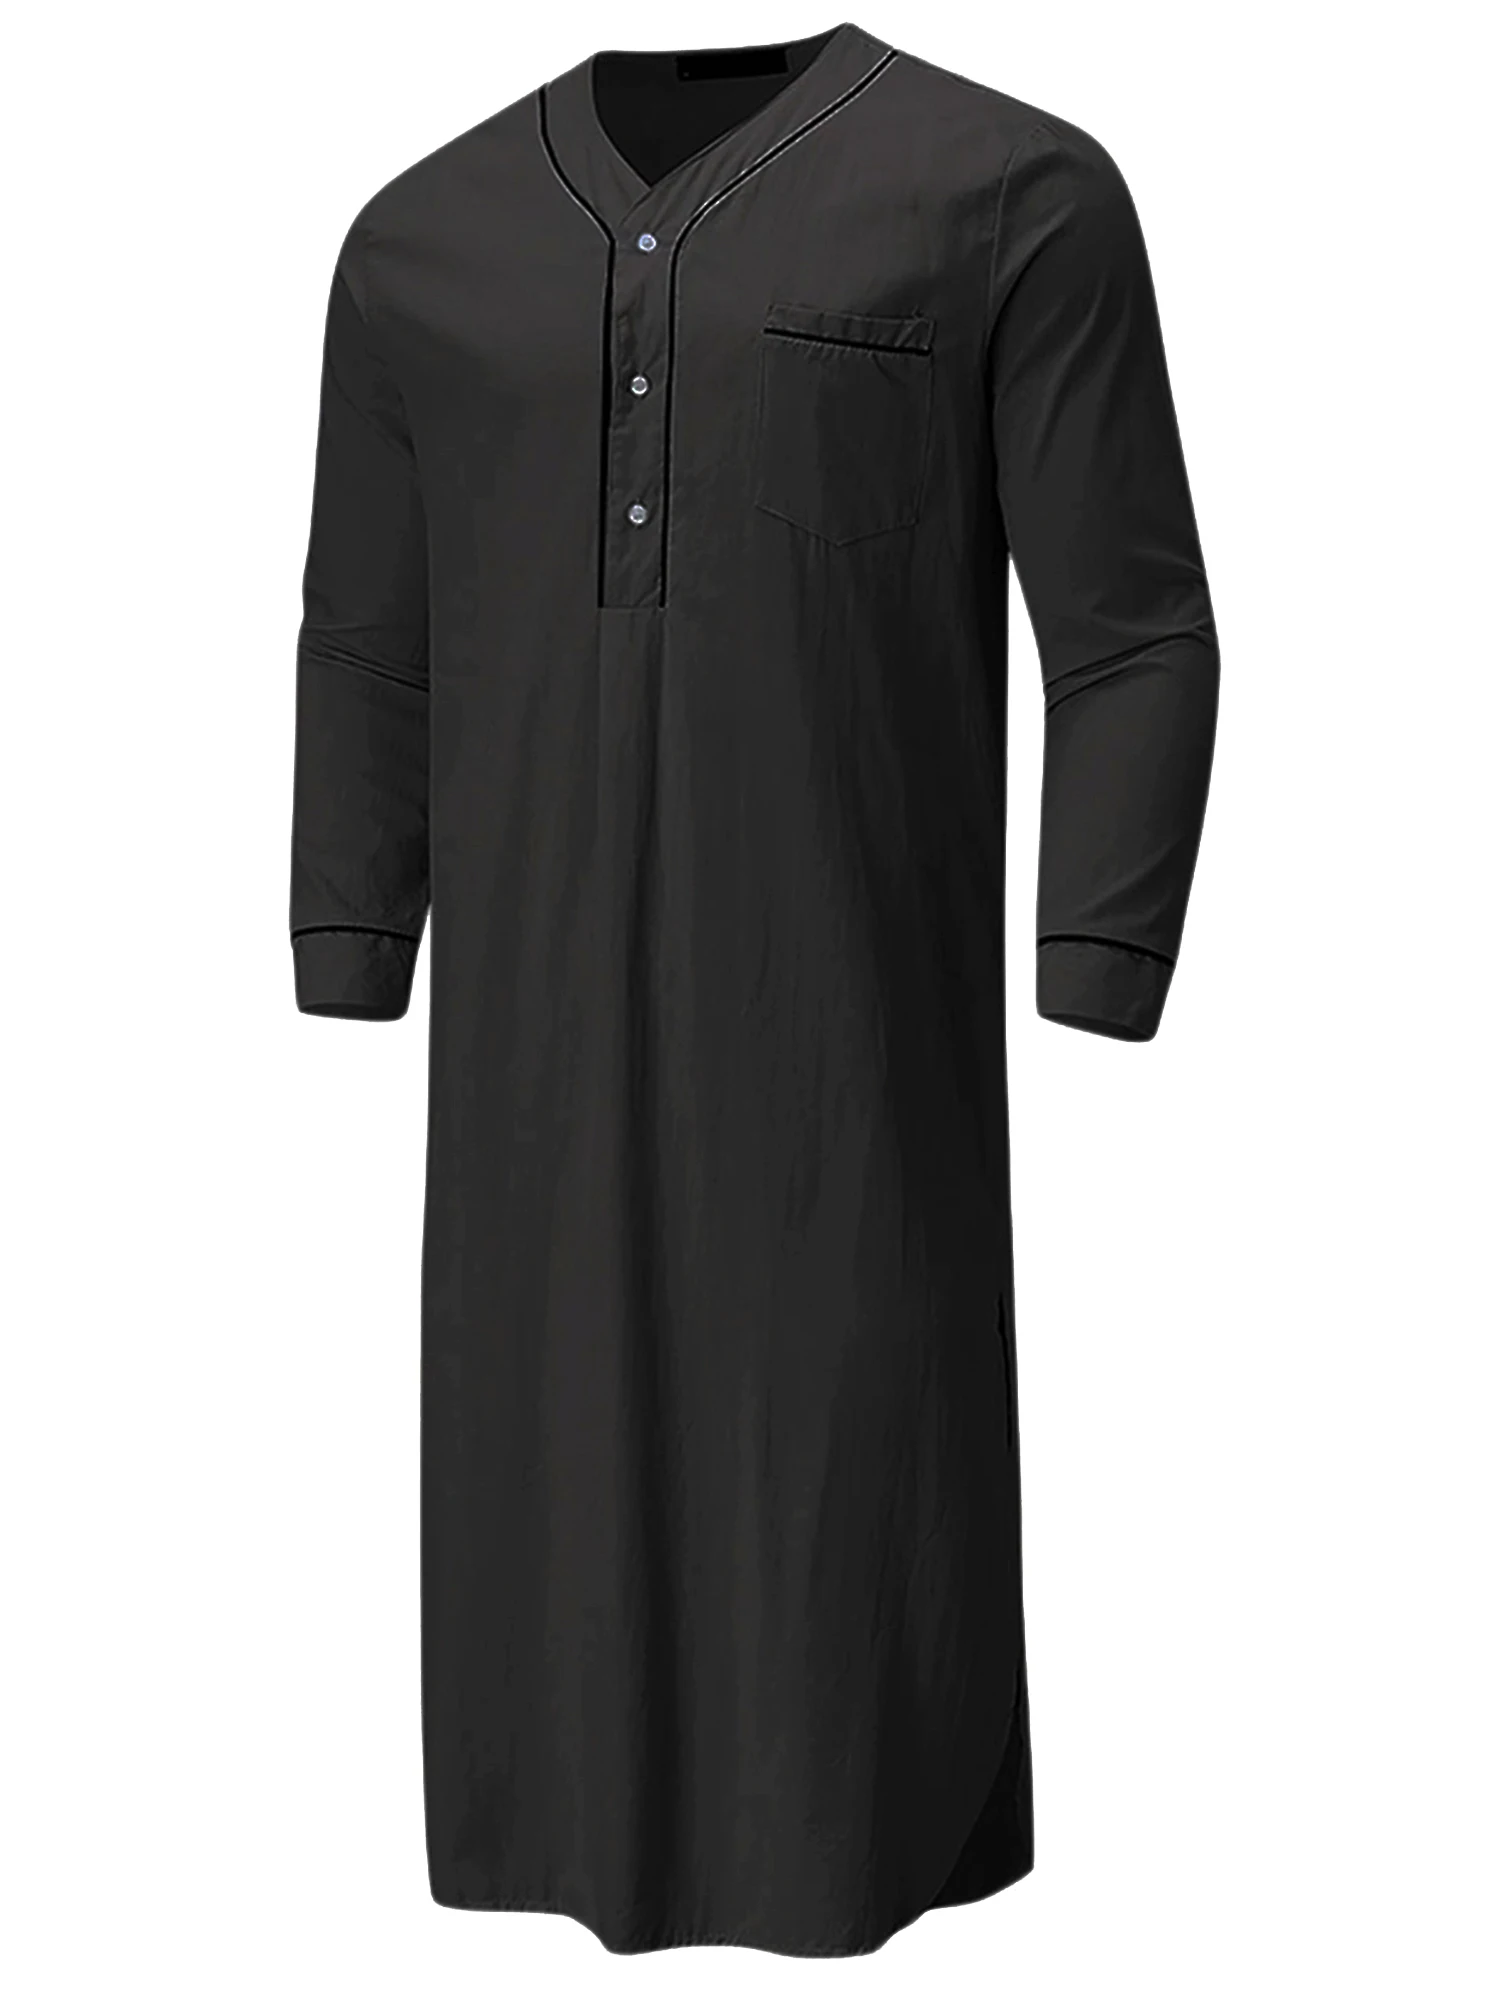 

Cozy Men s Nightshirt with Long Sleeves V-Neck Henley Pocket and Casual Loungewear Style for Comfortable Sleepwear